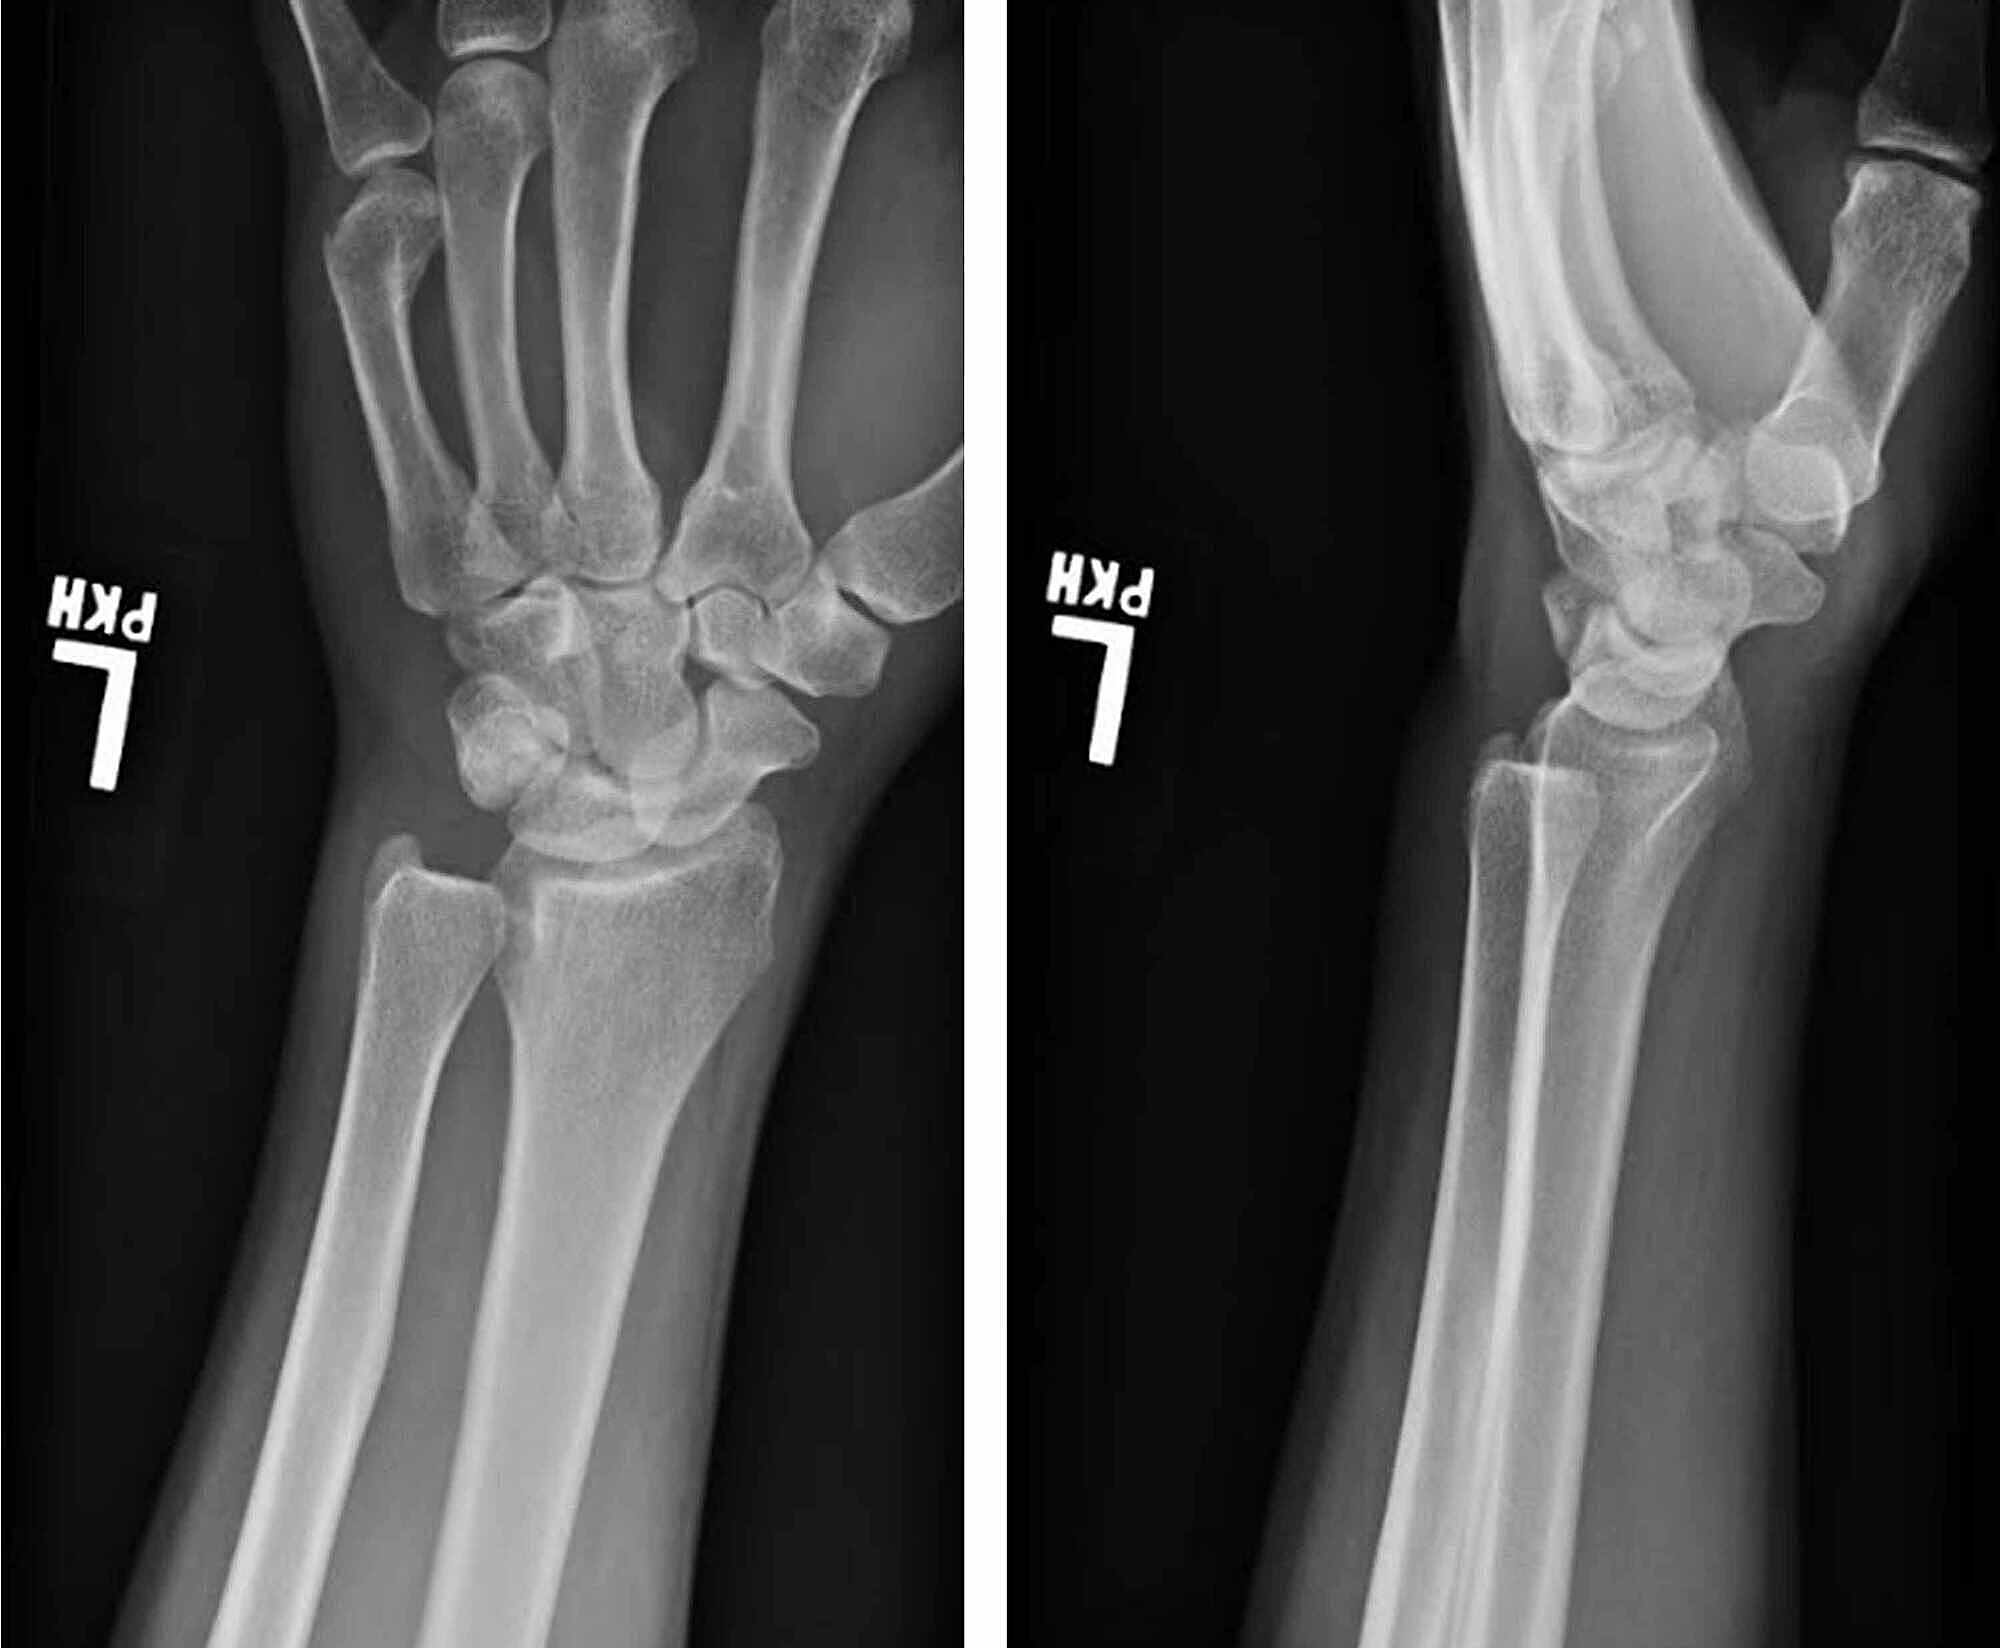 Cureus | Isolated Volar Dislocation of the Distal Radioulnar Joint ...